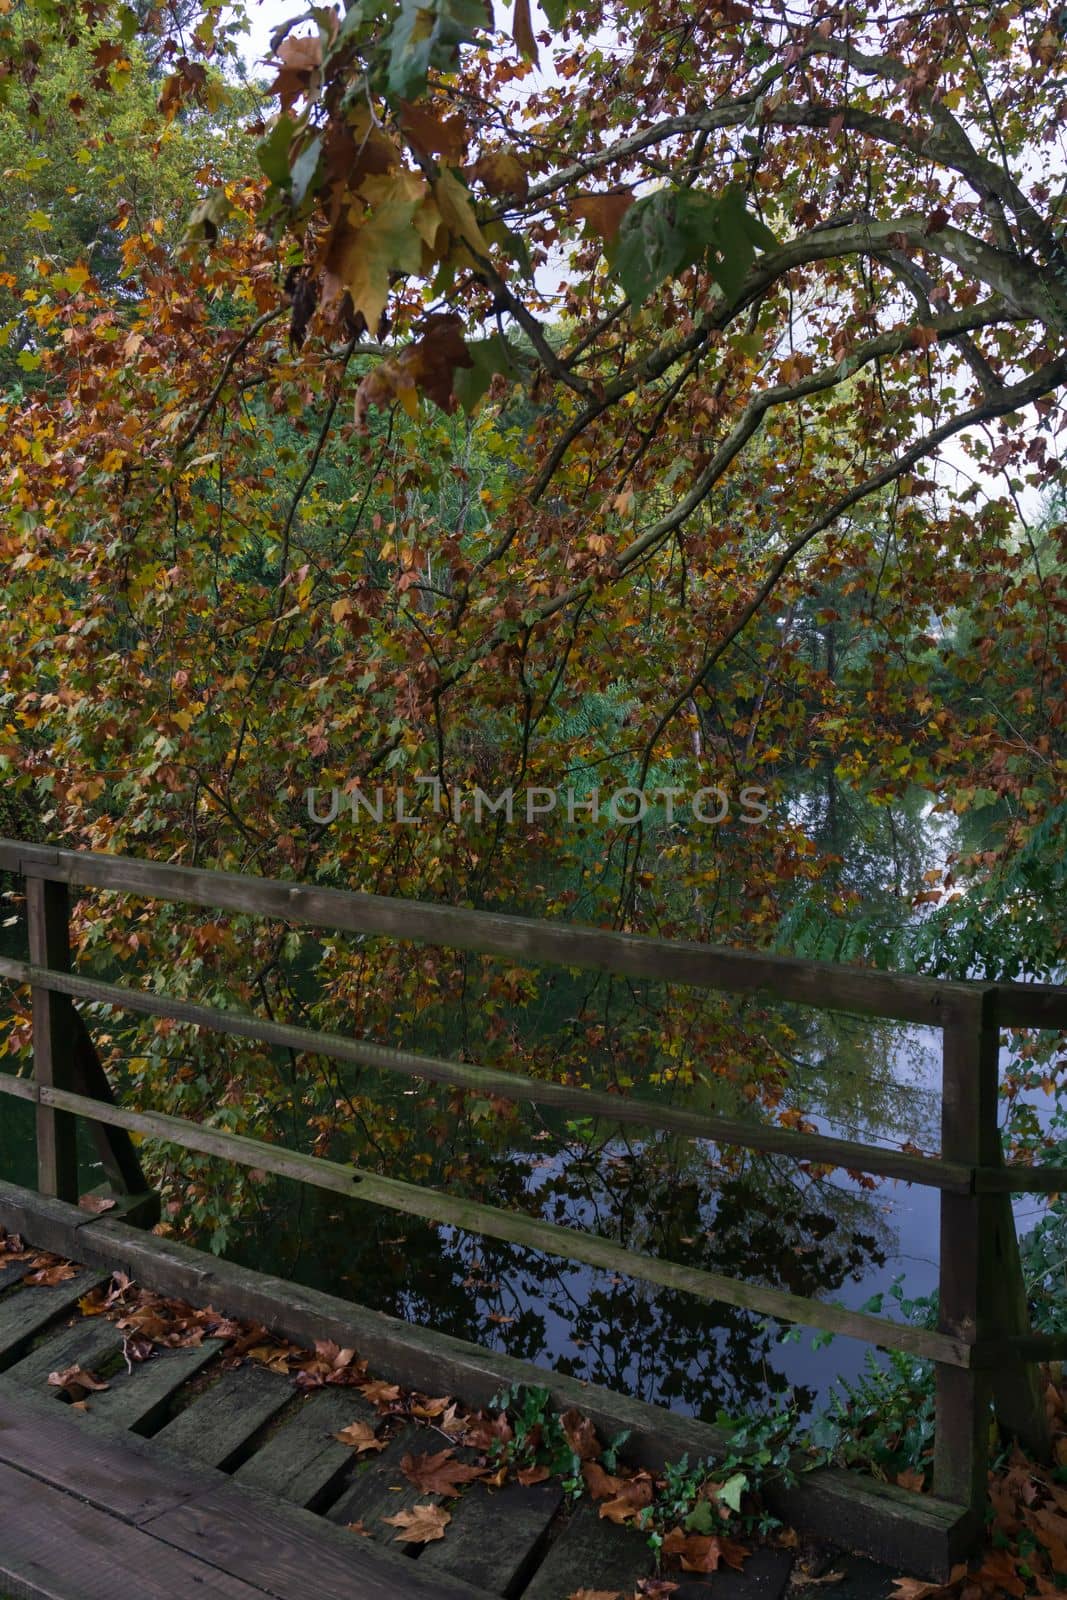 Wooden bridge across the river in the autumn park by Challlenger